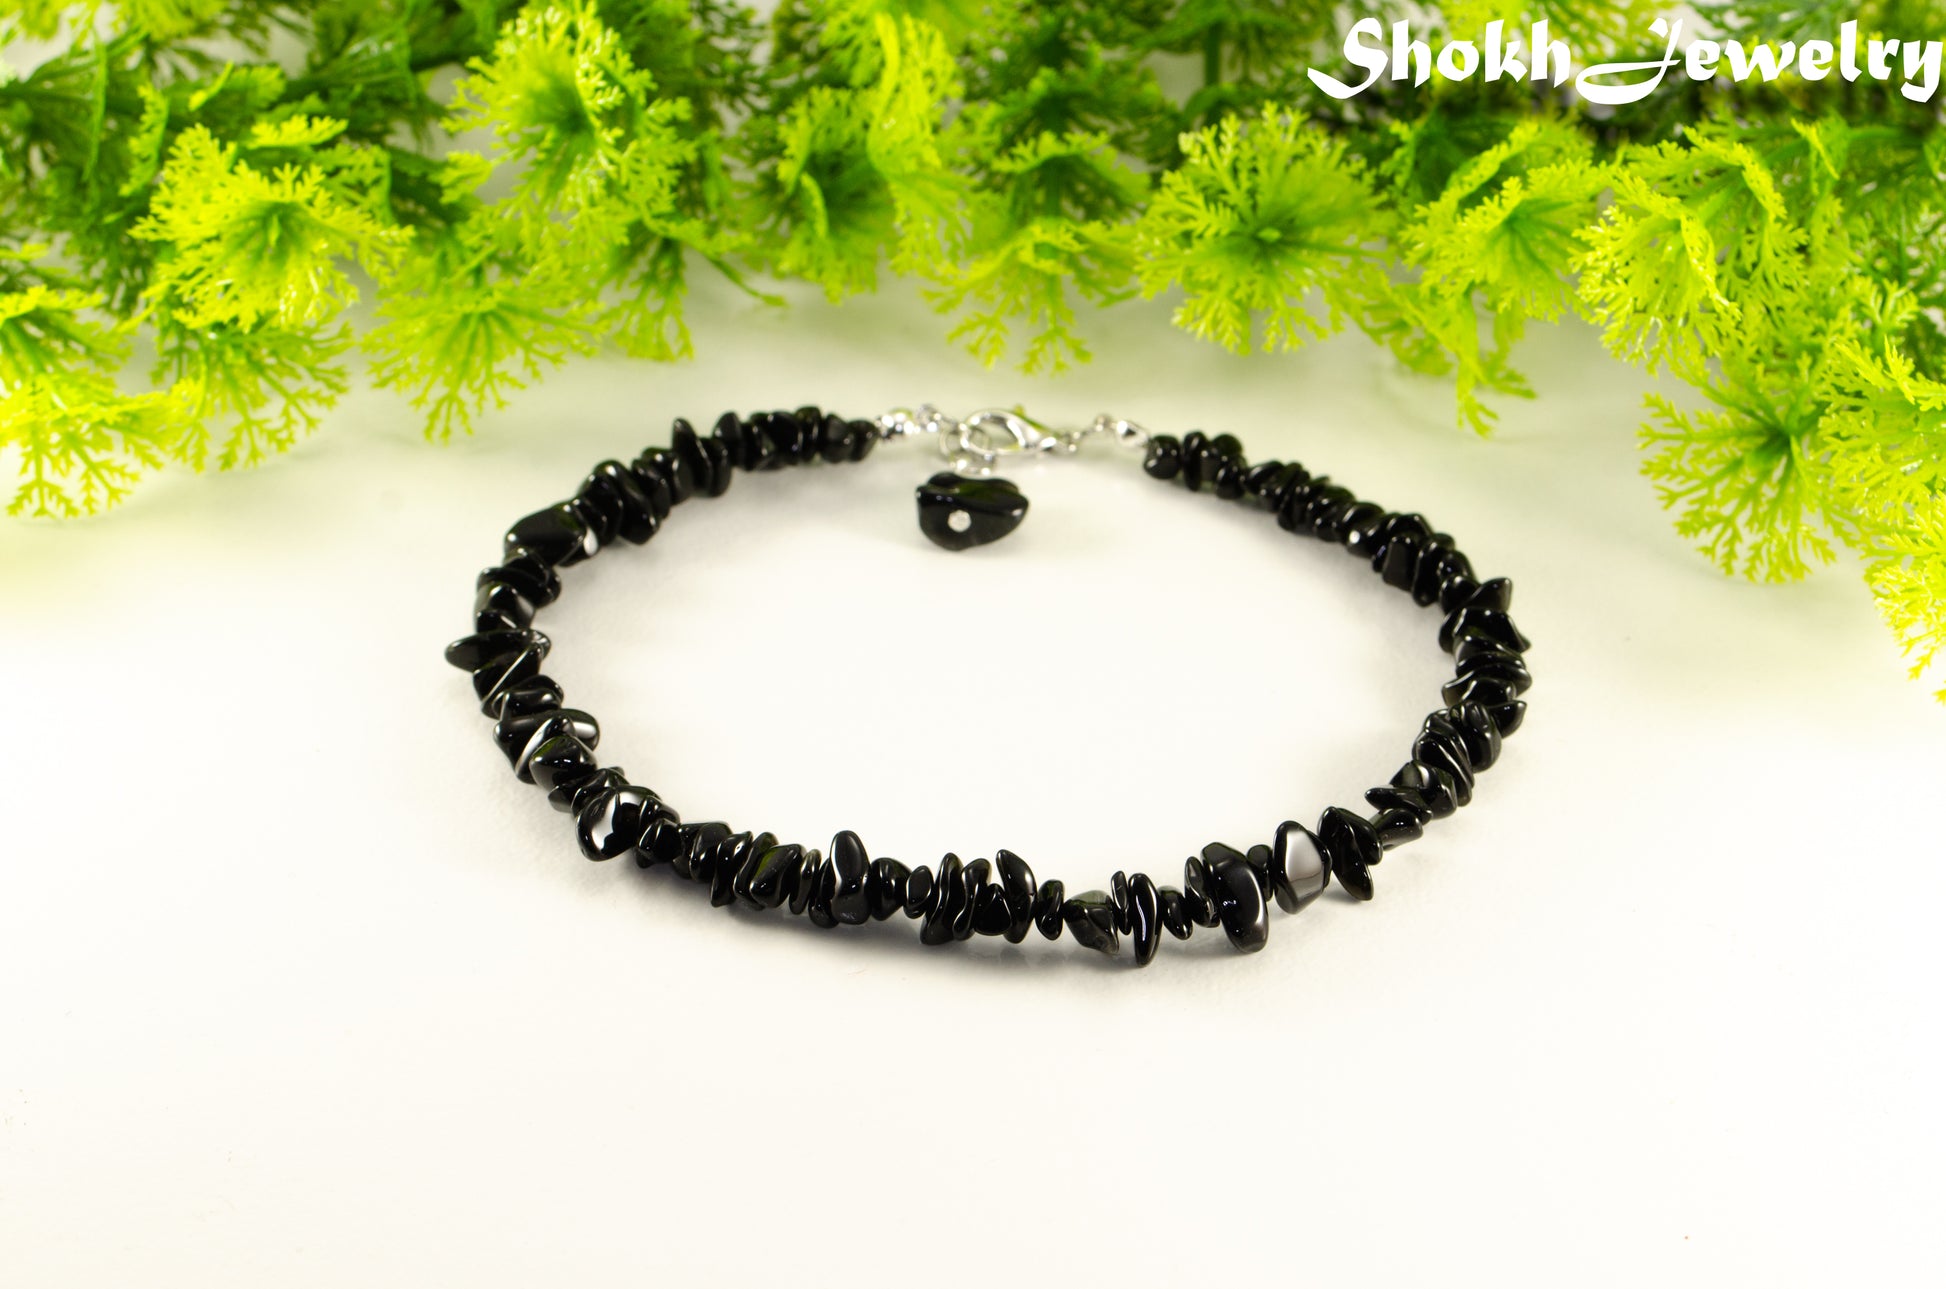 Natural Black Obsidian Crystal Chip Choker Necklace for women.